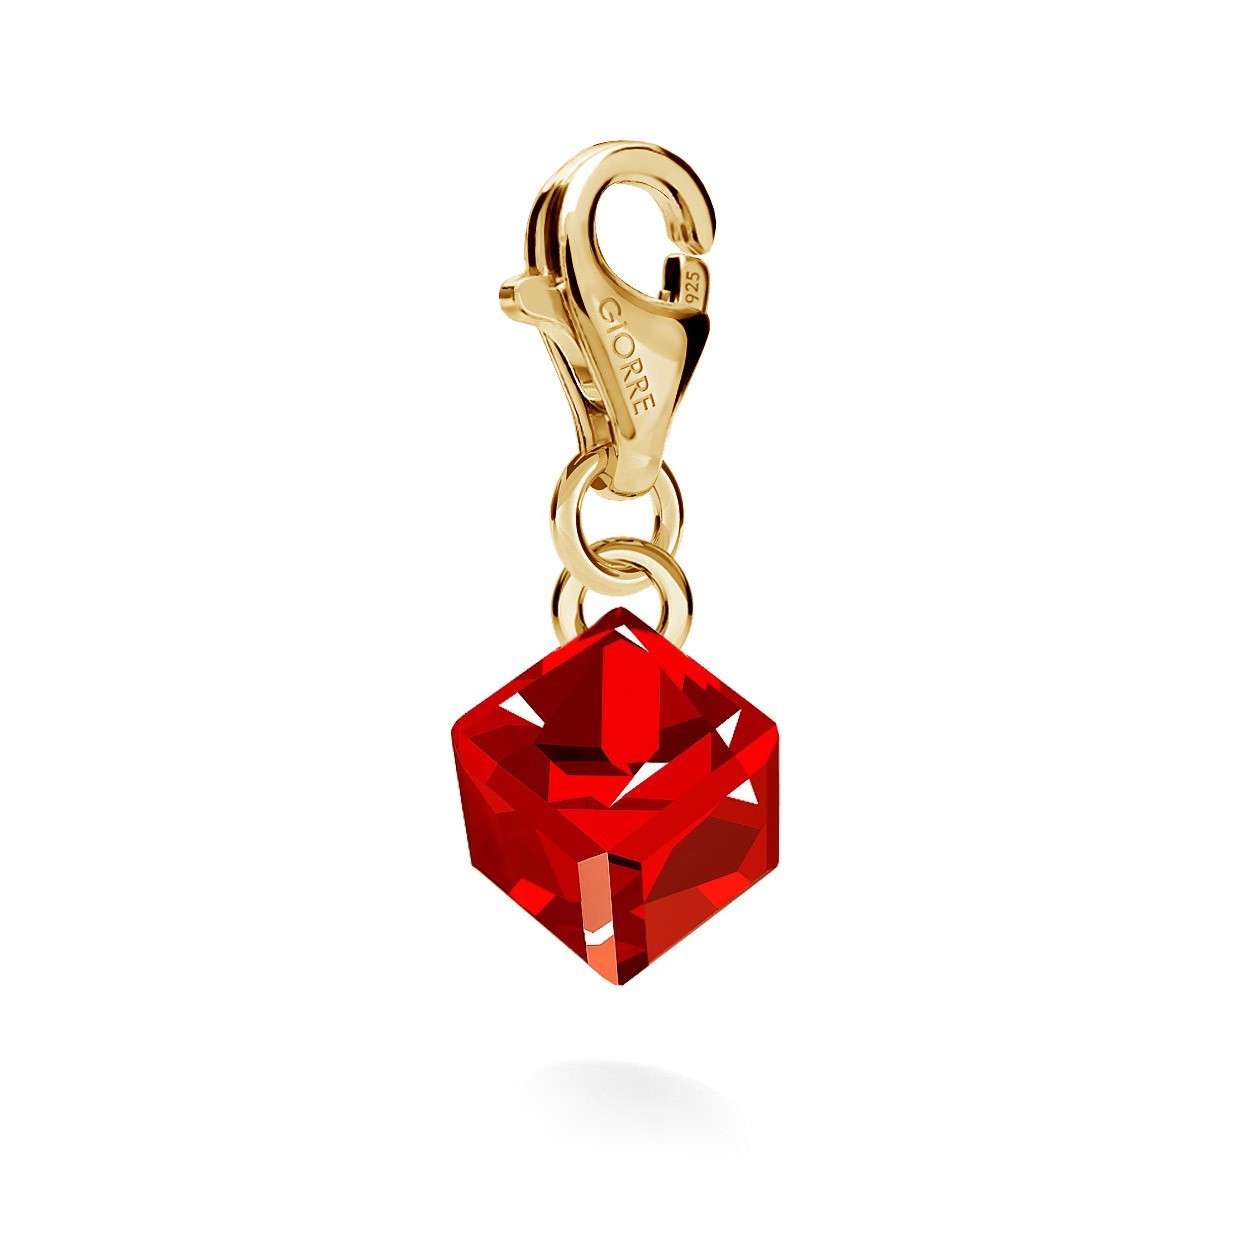 CHARM 99, CUBE, SWAROVSKI 4841 MM 6, STERLING SILVER (925) RHODIUM OR GOLD PLATED